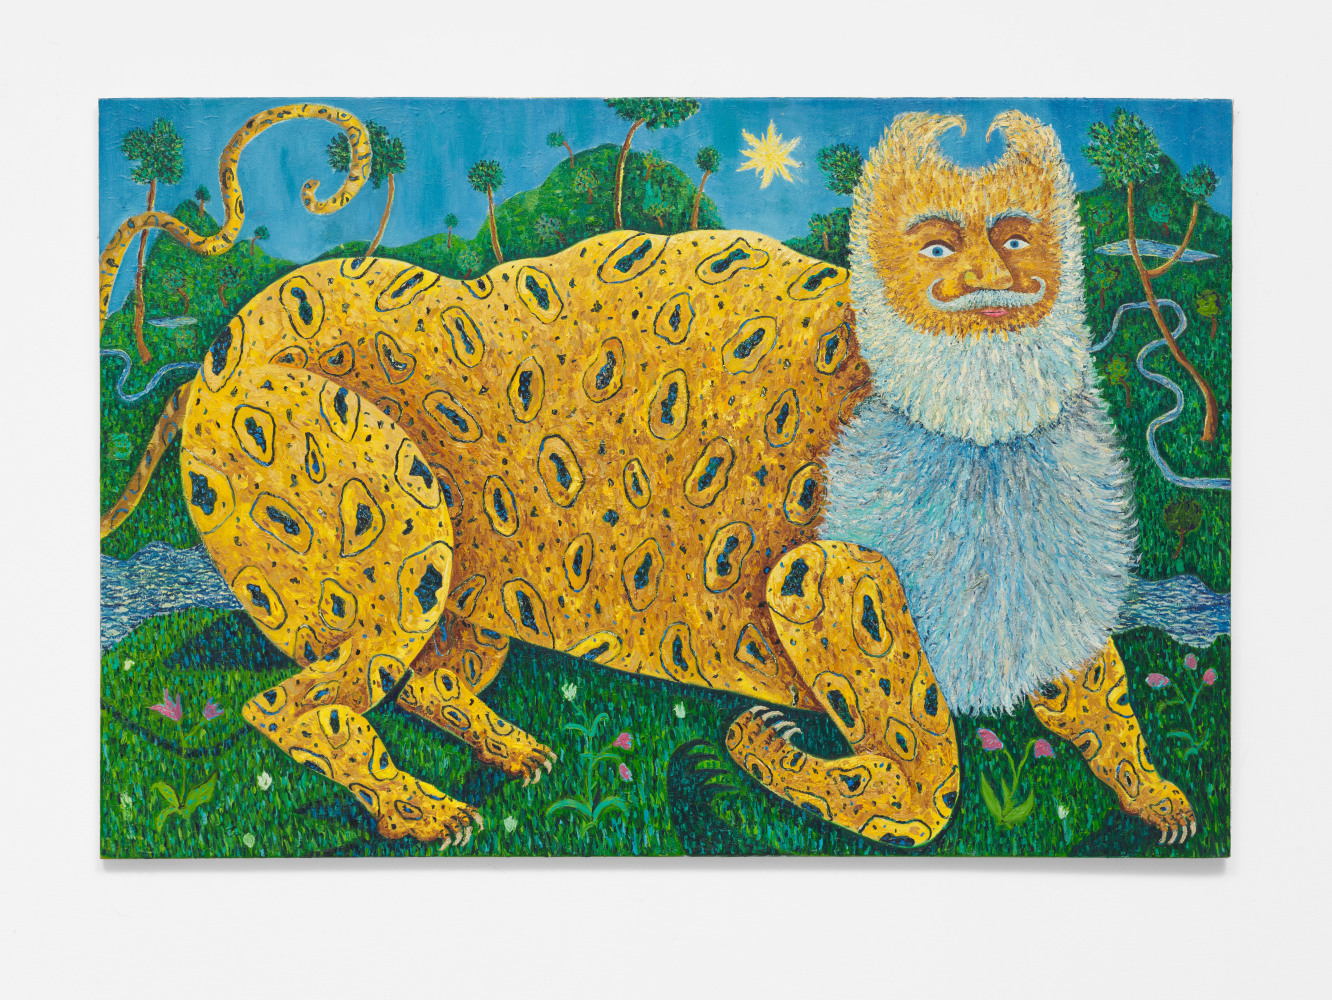 Mark Connolly
Leopard, 2020
Oil on canvas
40.16h x 59.84w in
102h x 152w x 1.78d cm